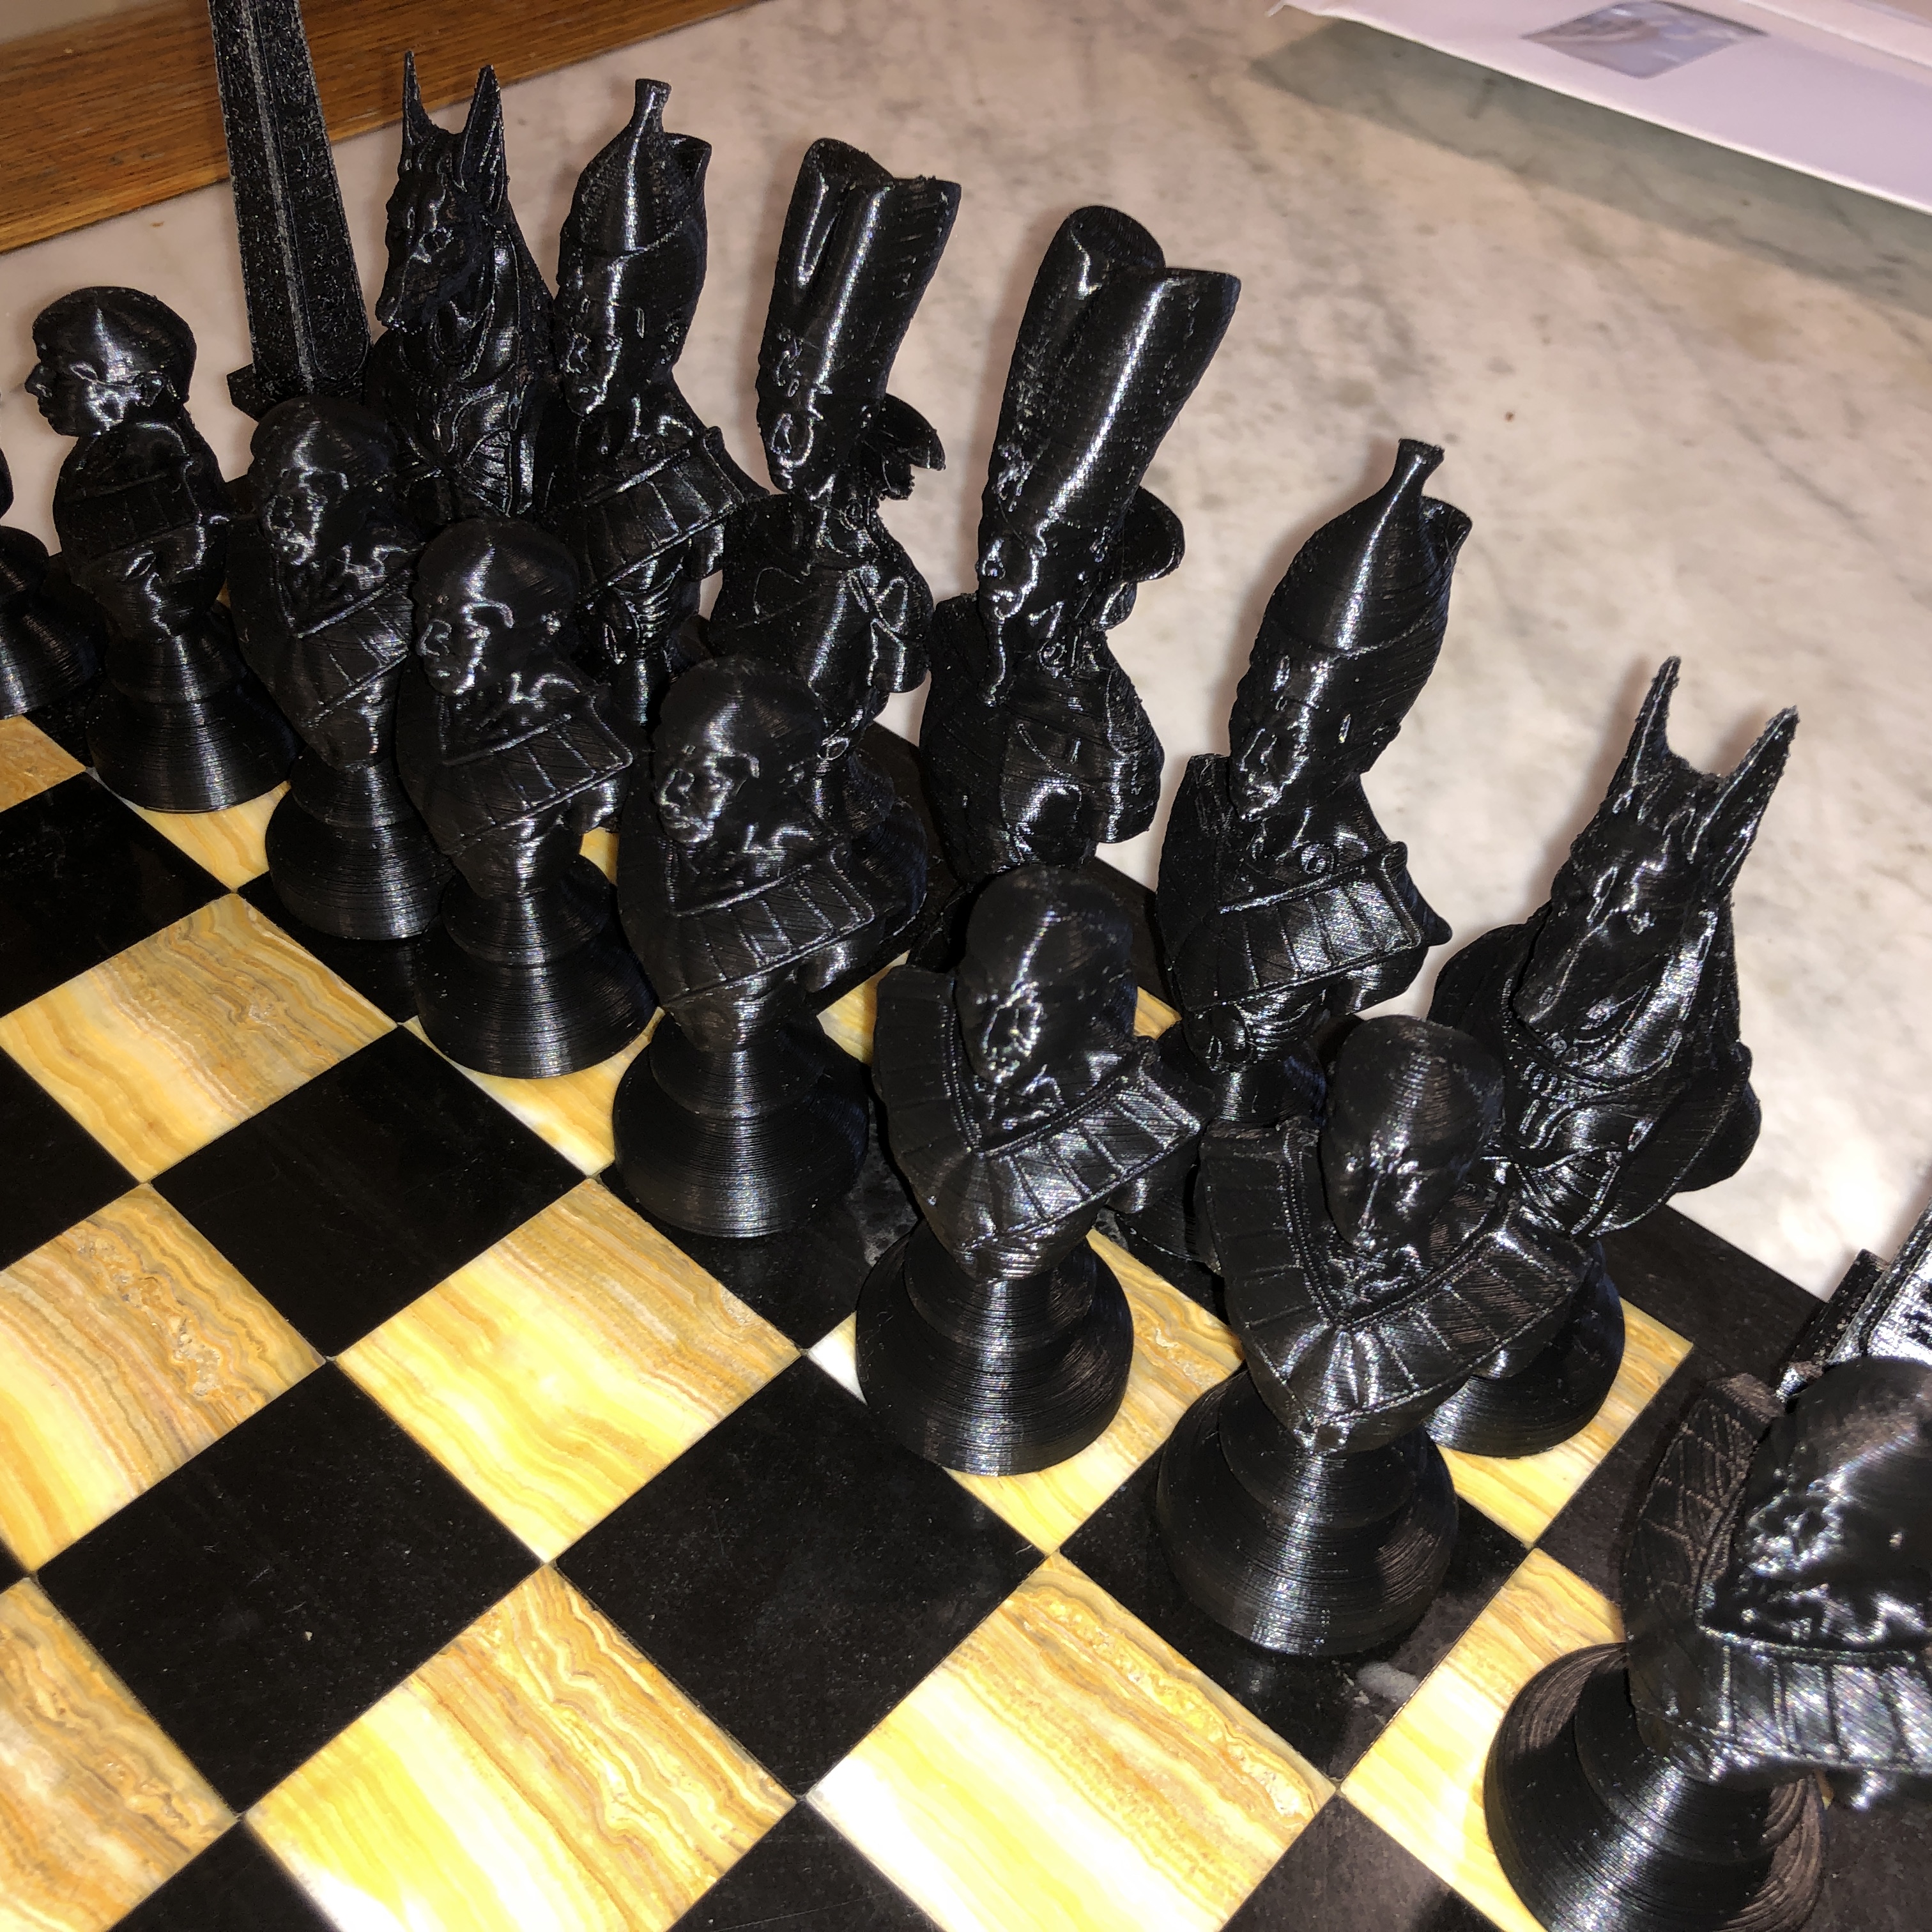 Made a chess mold and cast my first few chess pieces. These were